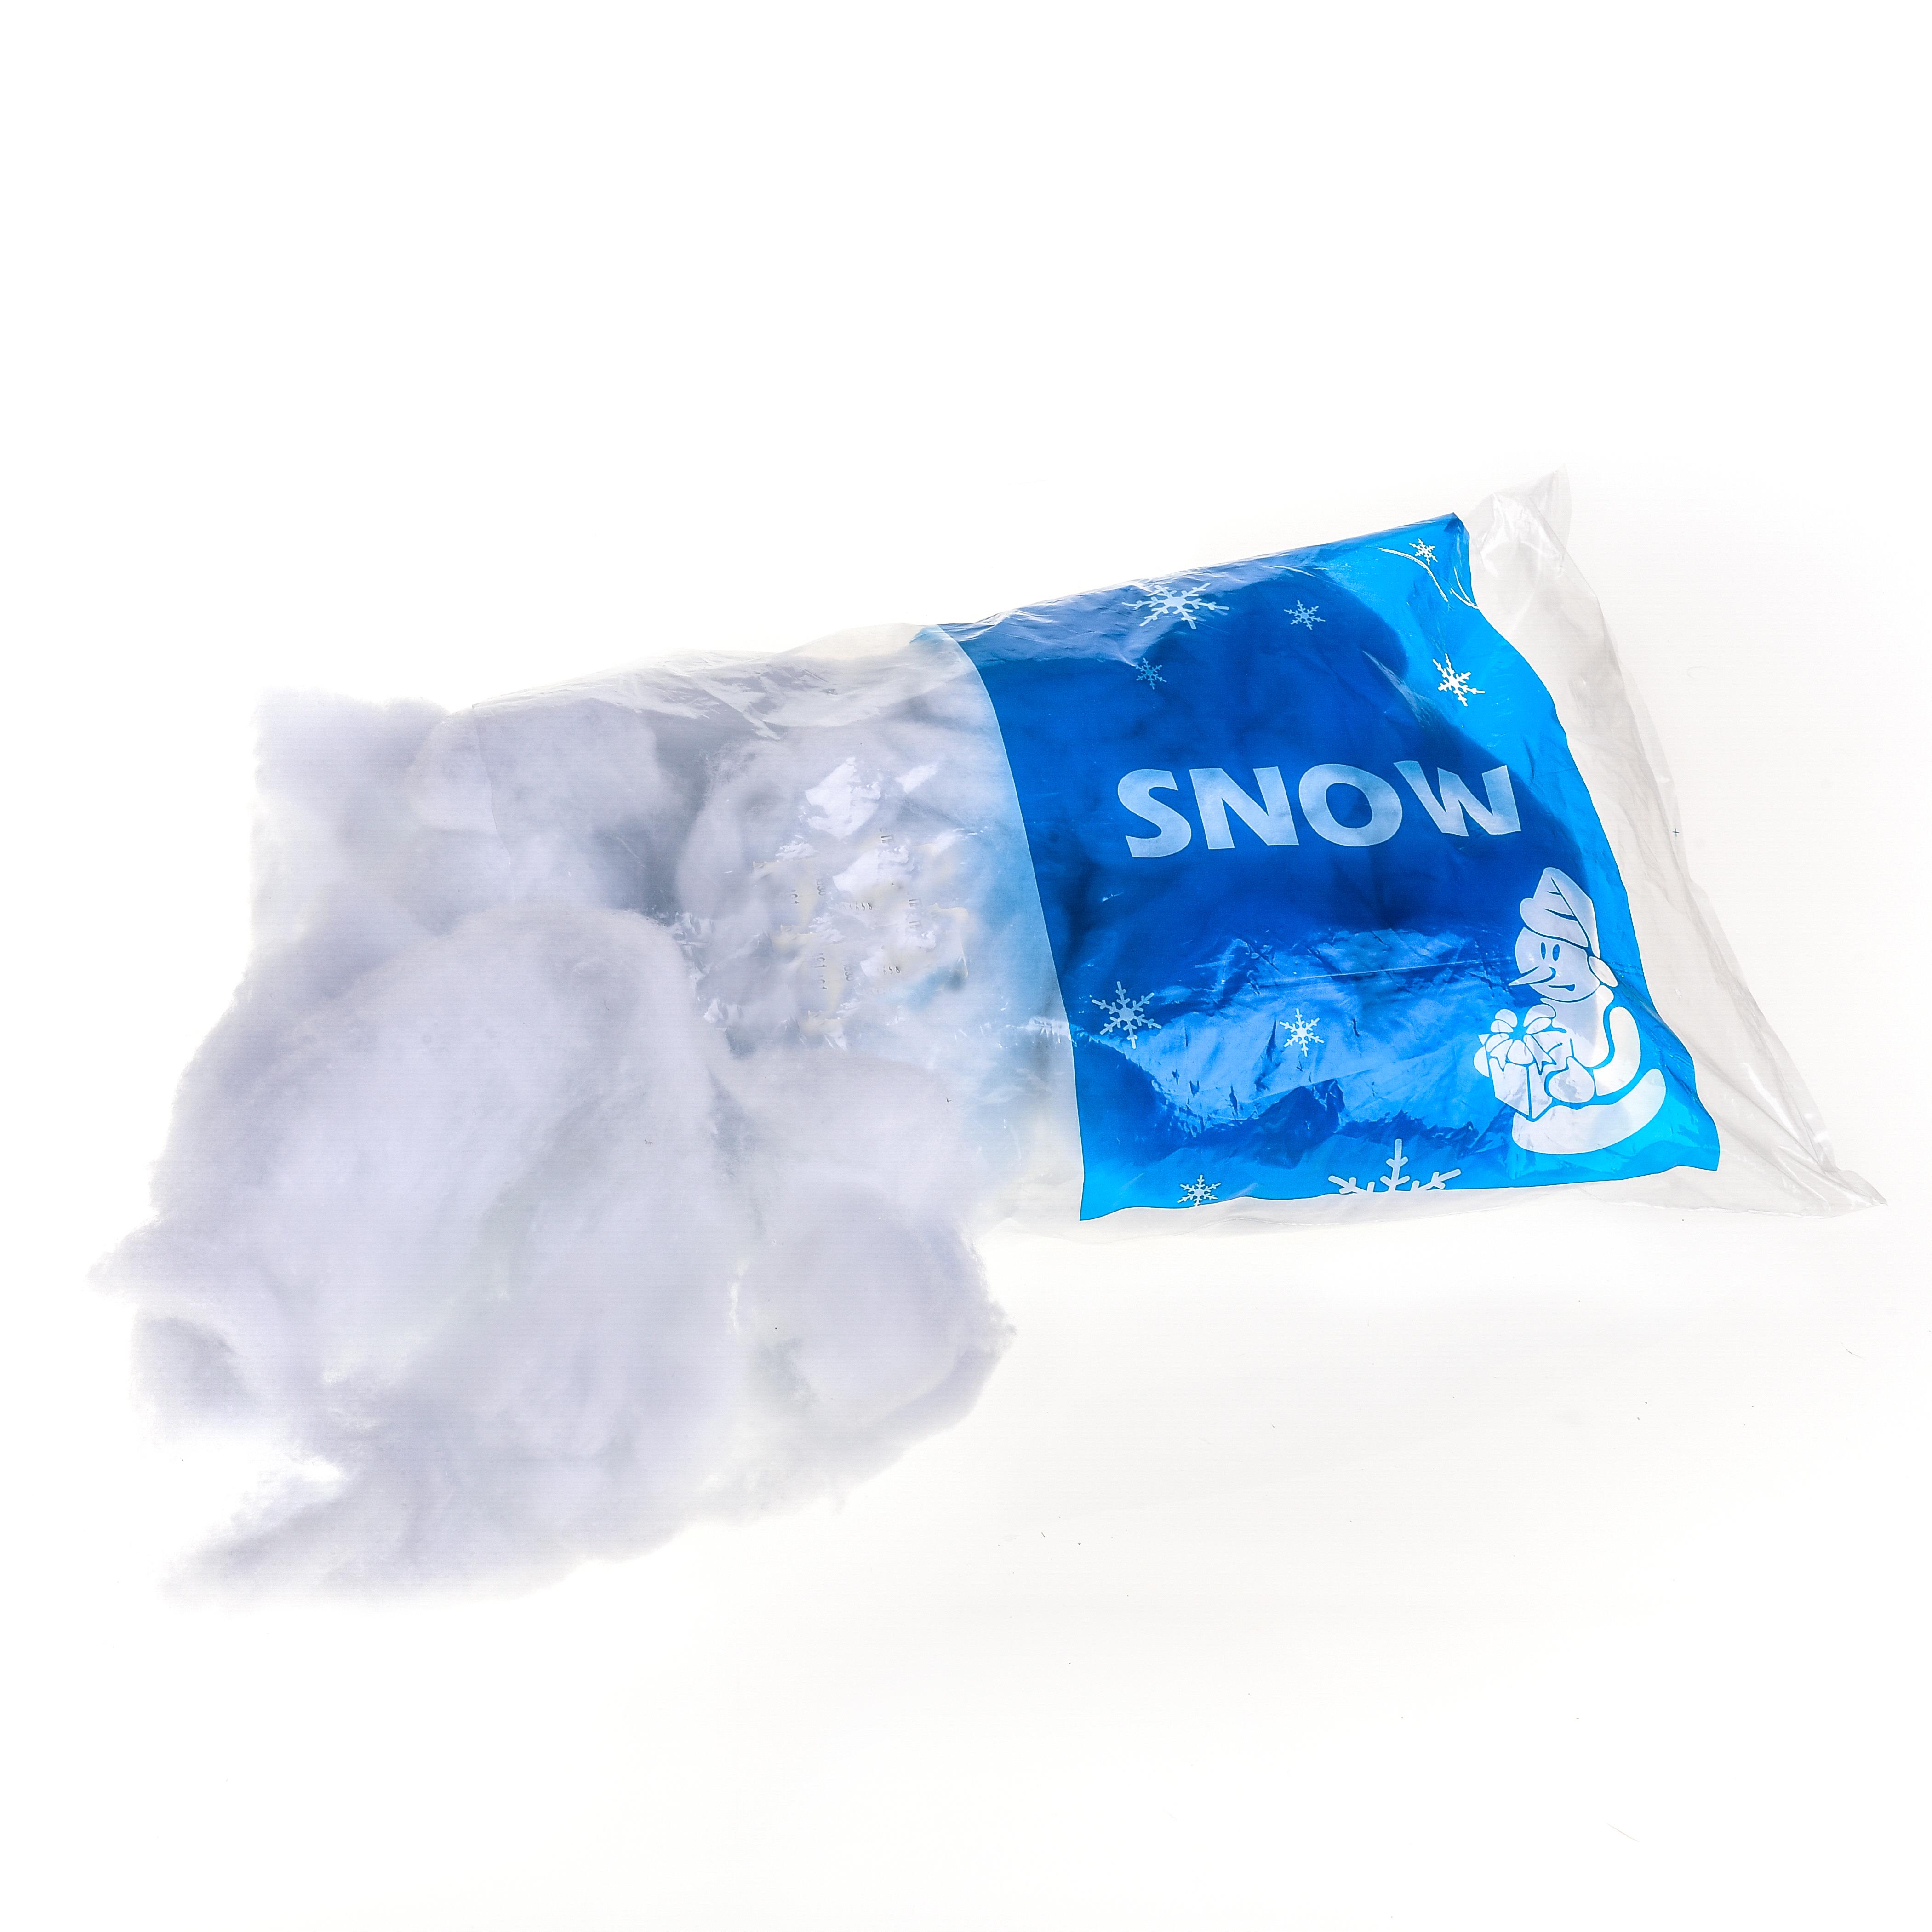 PACCO NEVE TIPO COTONE 100 GR